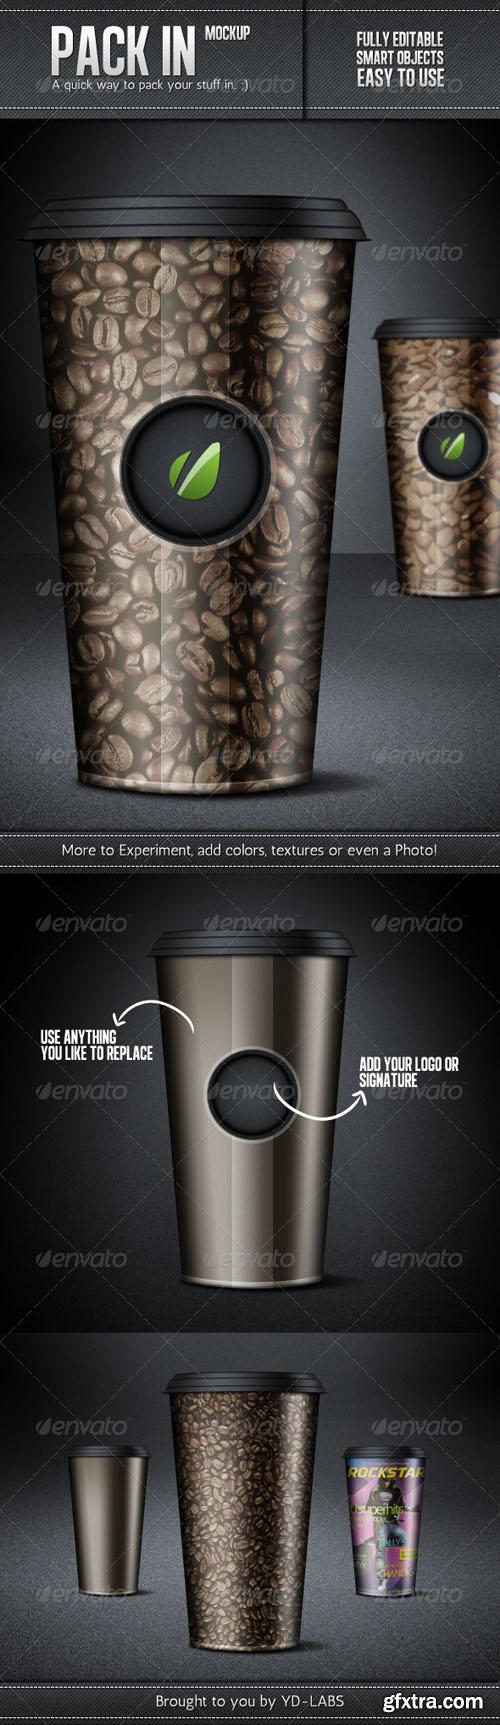 Graphicriver - Pack In Mockup